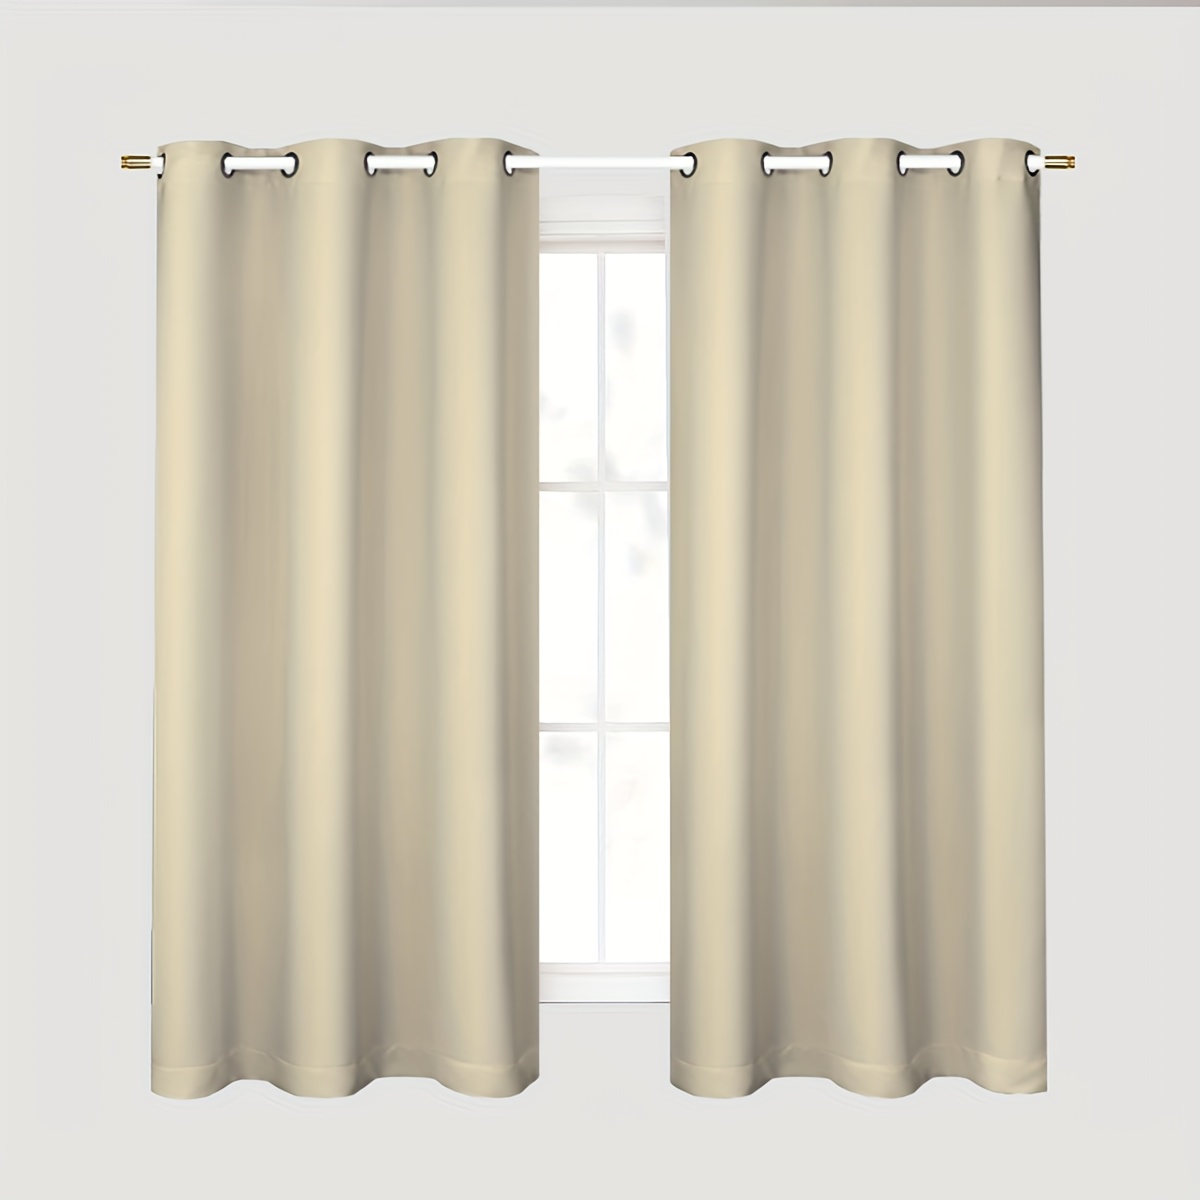 Grey Blackout Curtains with Sheer Layer - Grommet Top Thermal and Noise  Reduction Panels for Bedroom and Living Room Light Blocking and Energy  Saving